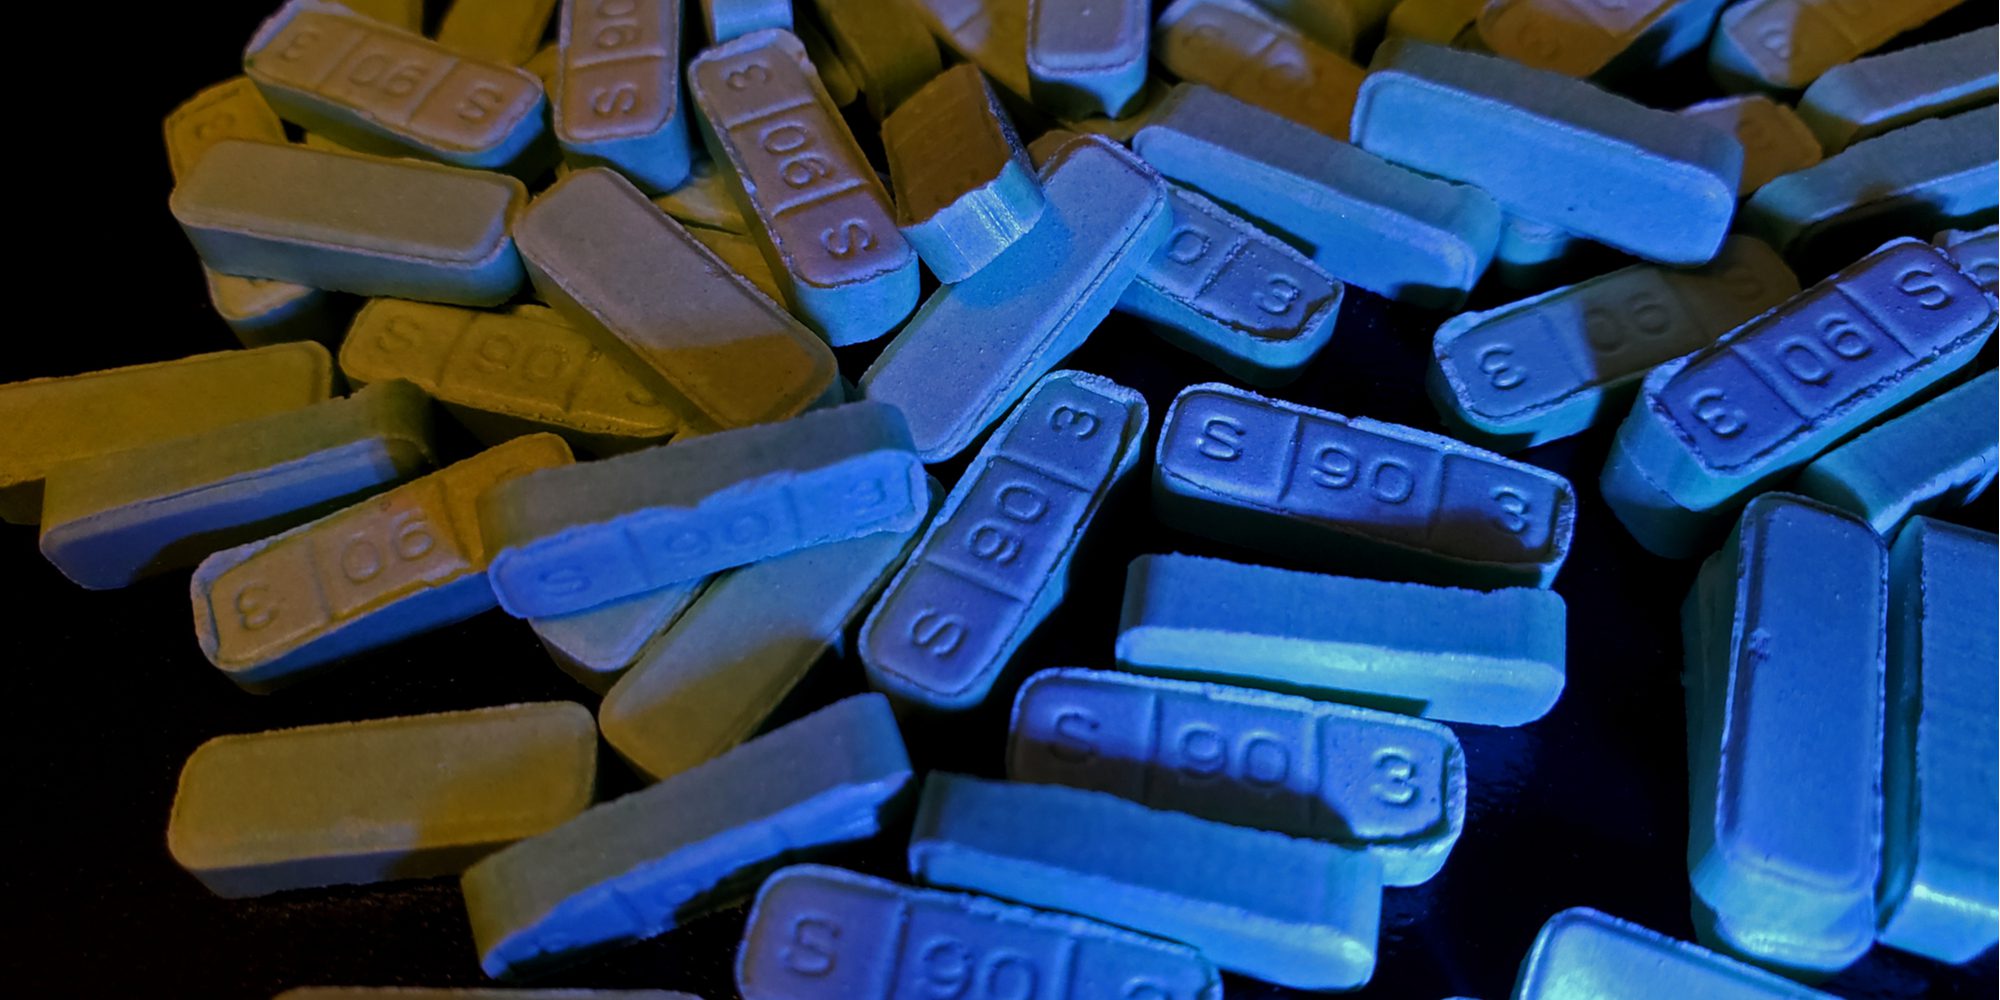 Identifying Fake Xanax Bars: Treating Anxiety Safely